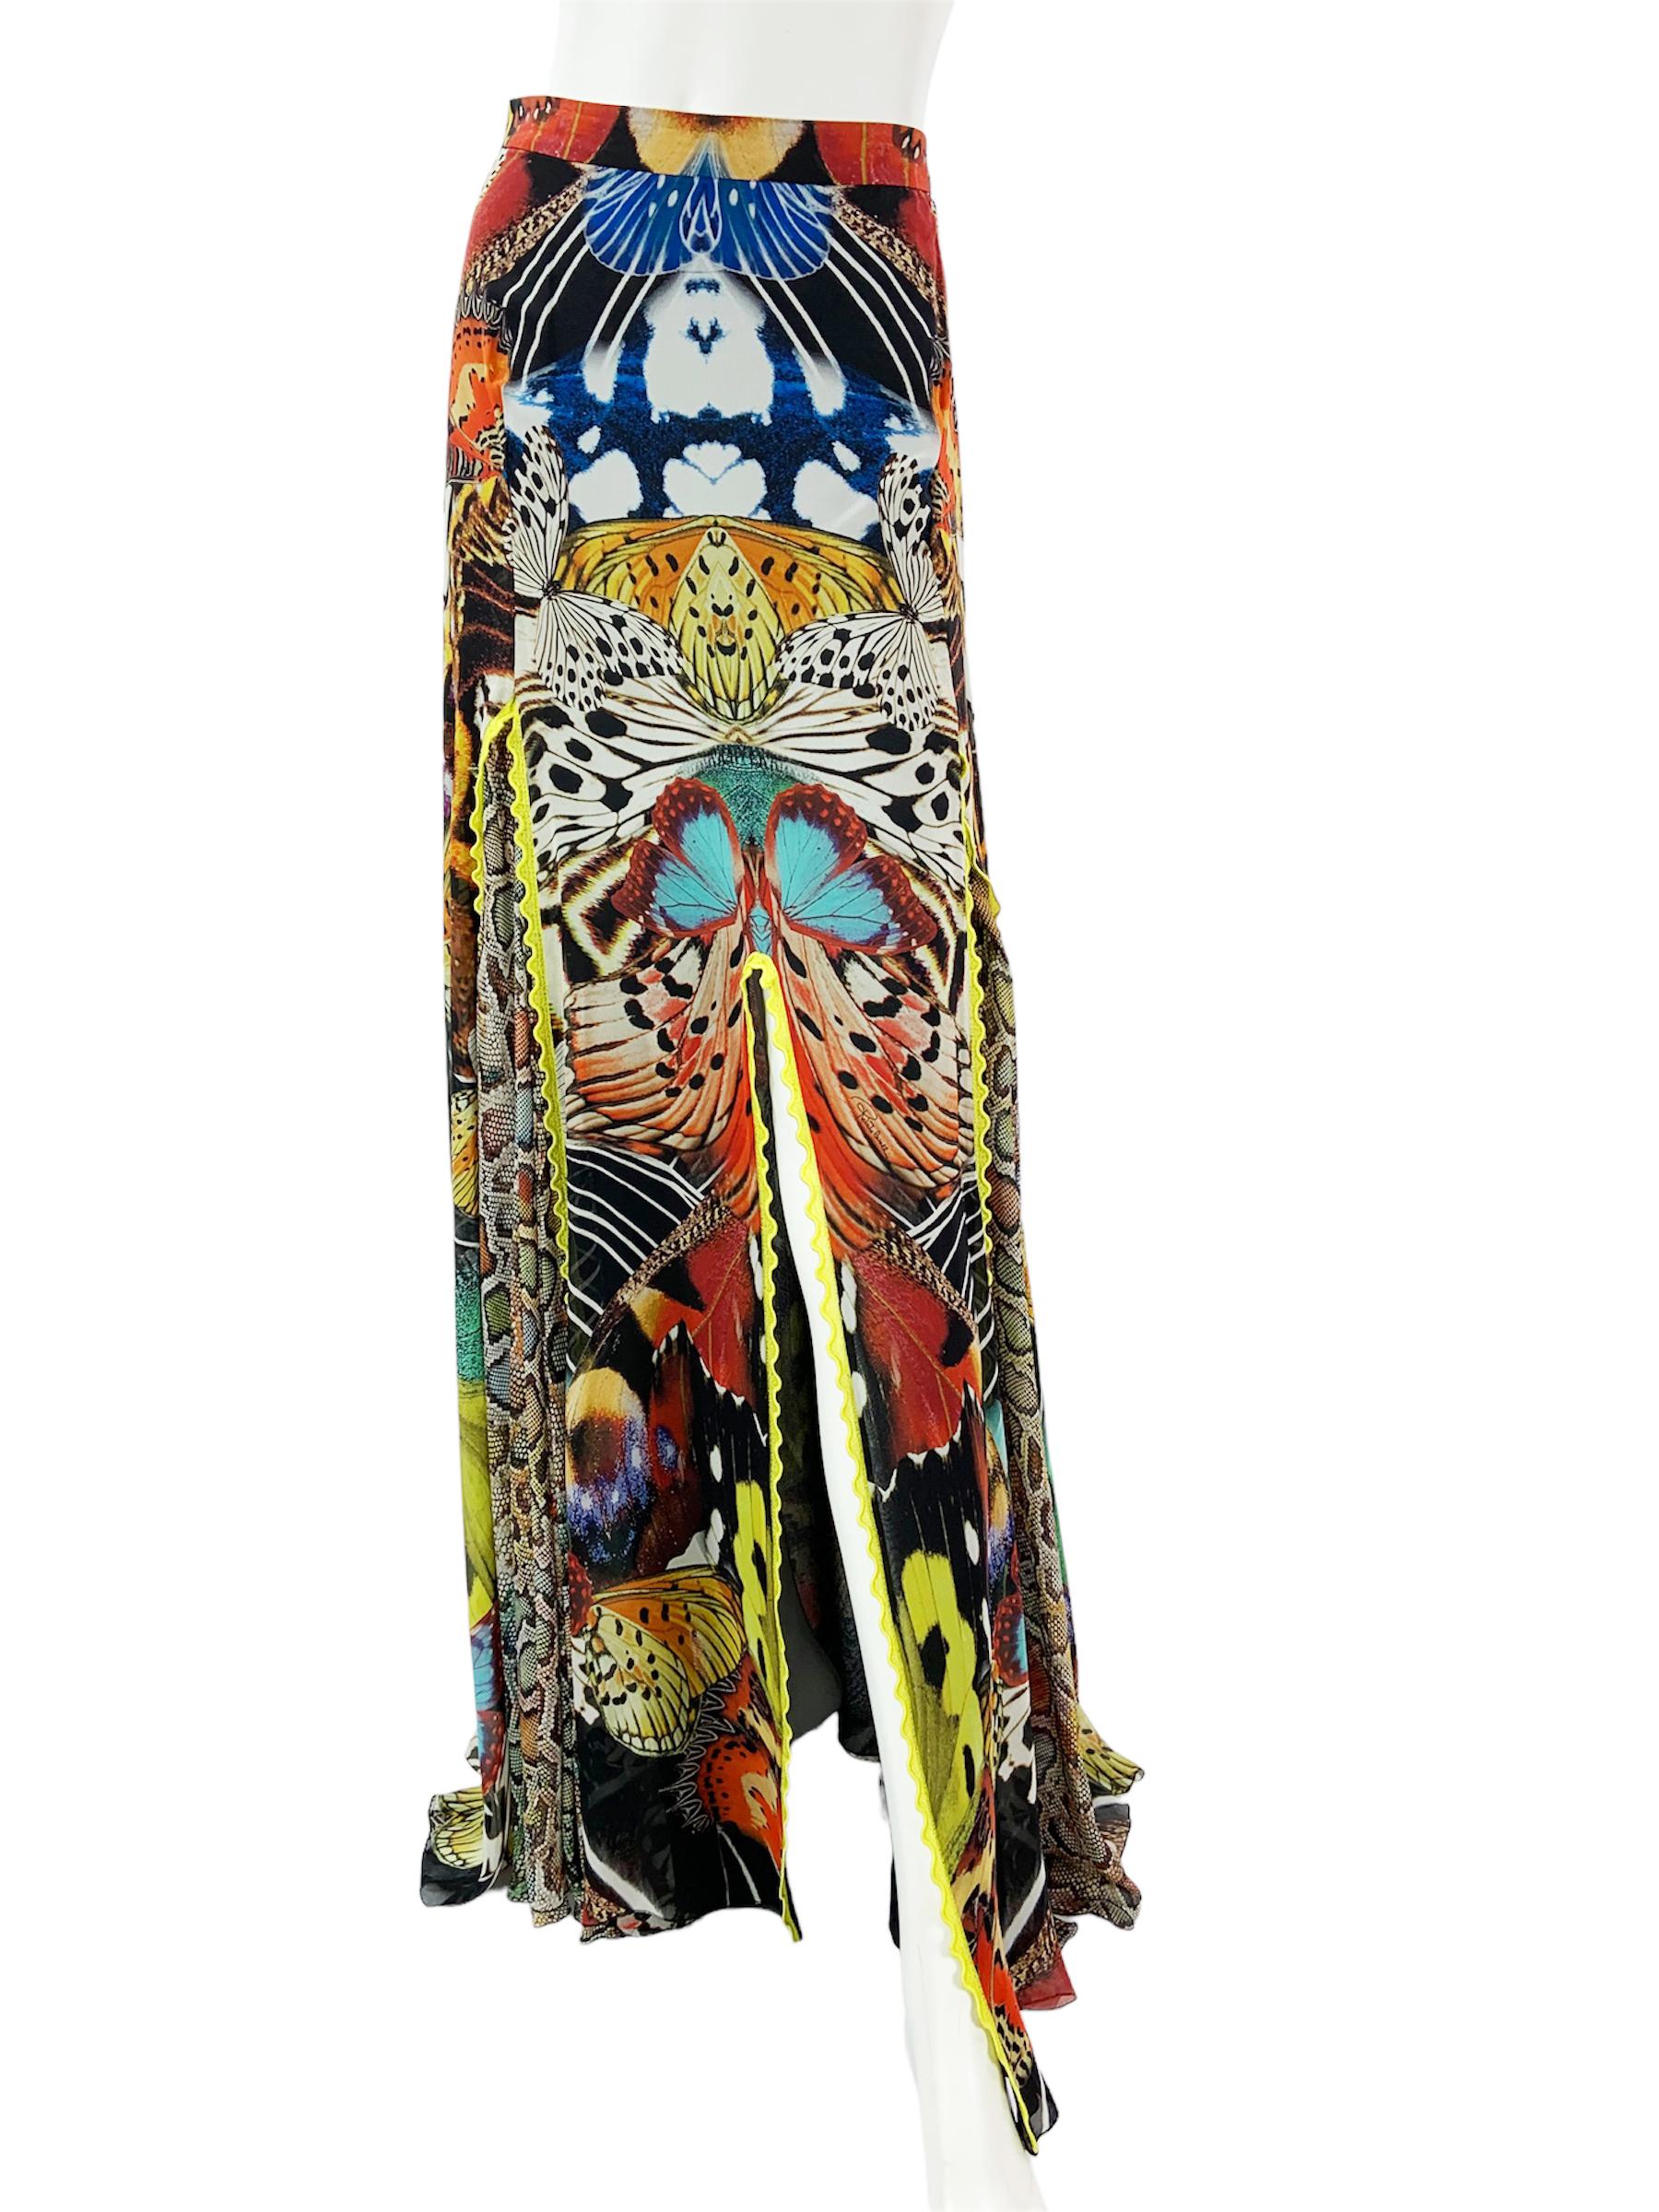 New Roberto Cavalli Silk Butterfly Print Maxi Skirt
Italian size - 40
100% Silk, Butterfly and Snake Skin Print, Front High Slit, Black Silk Lining, Zip Closure. A-line Style.
Measurements: Length - 45 inches, Waist - up to 30